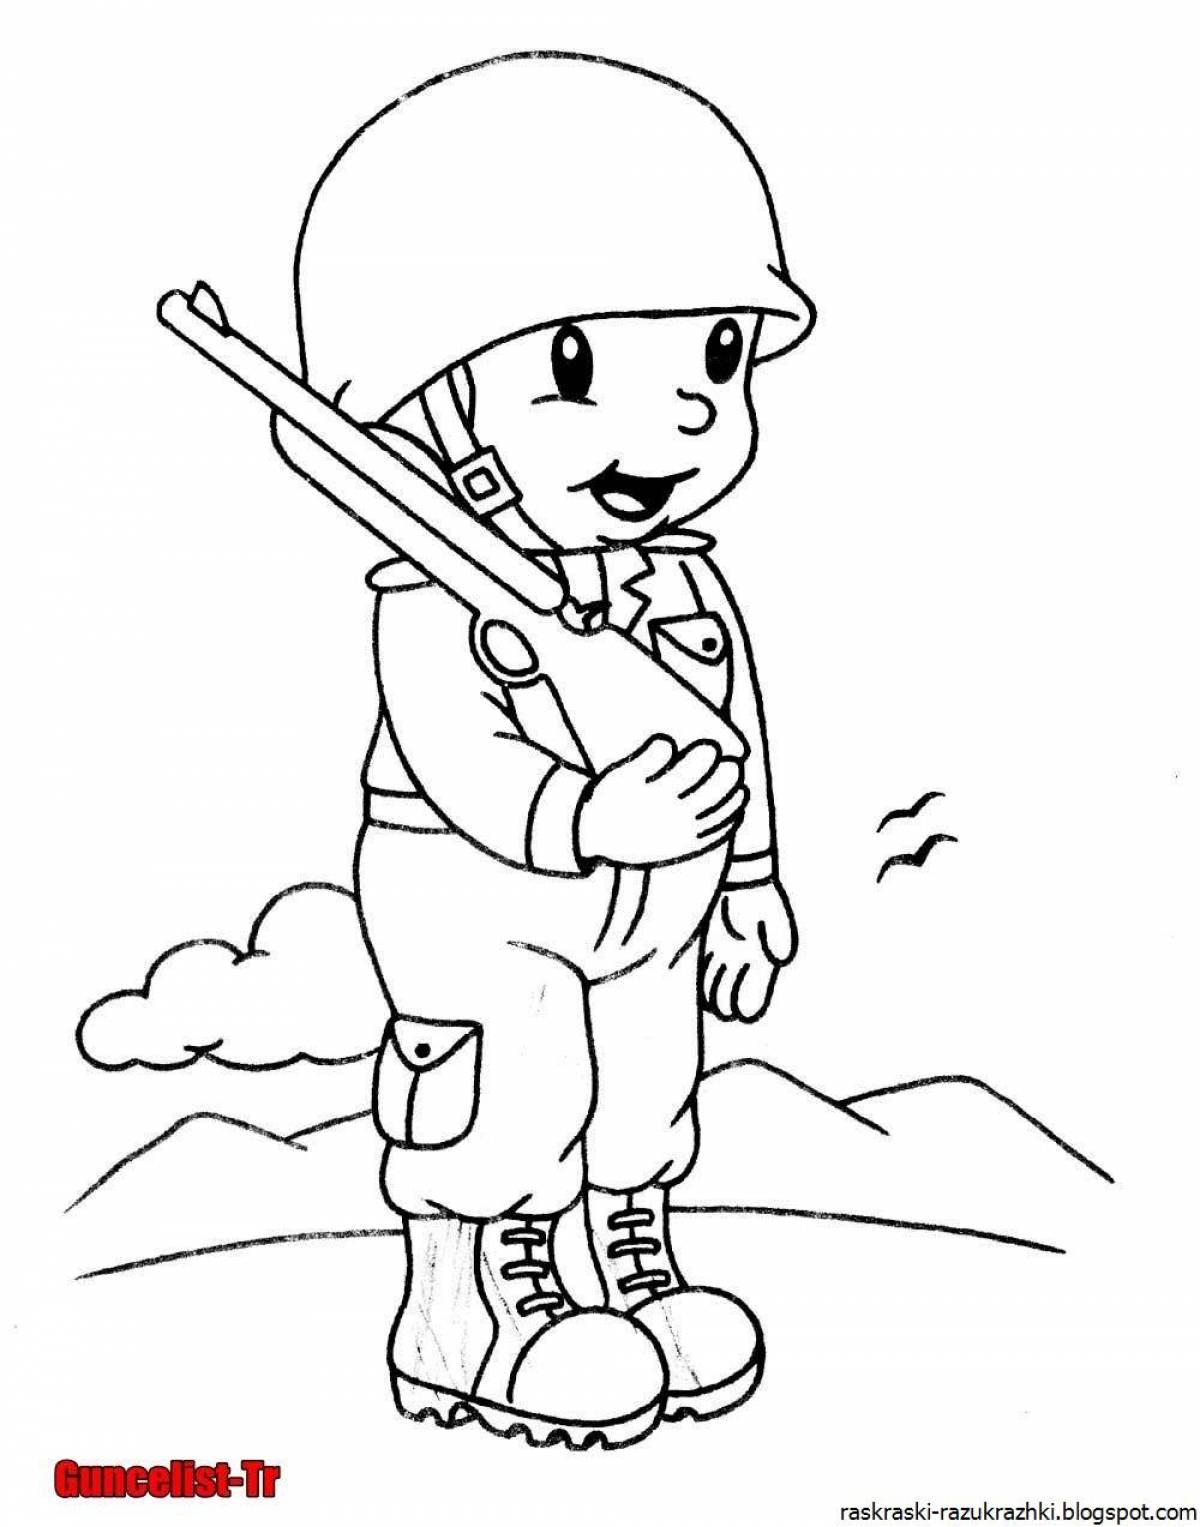 Animated war coloring book for kids